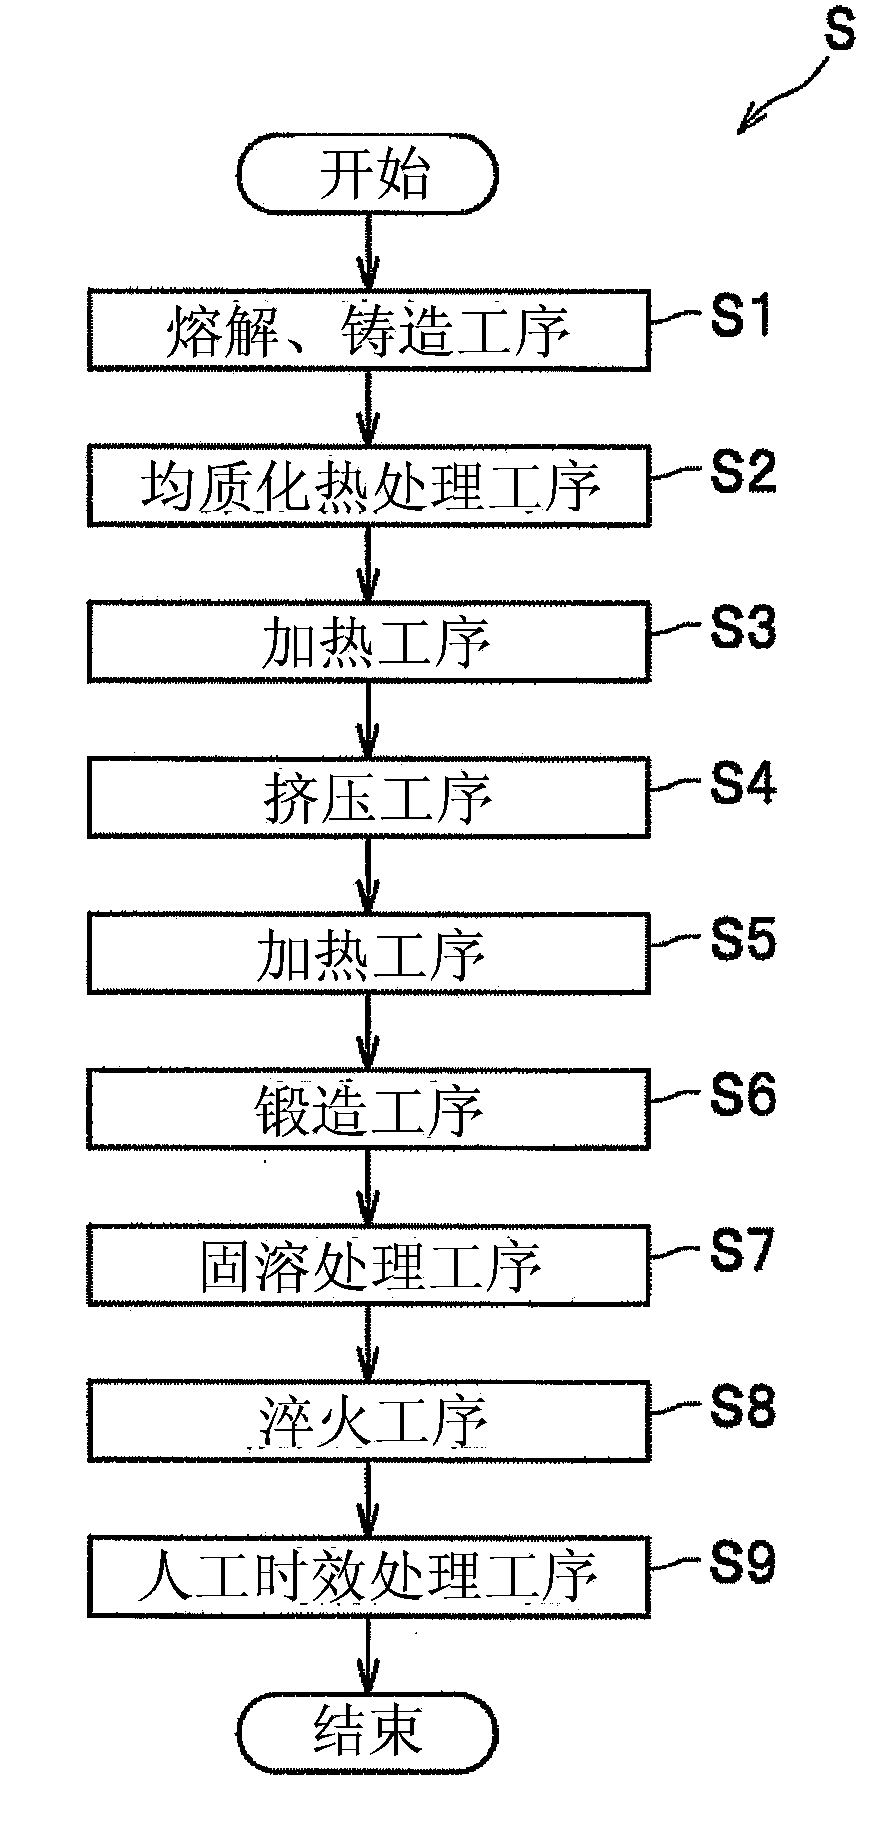 Aluminum alloy forged material for automotive vehicles and production method for the material